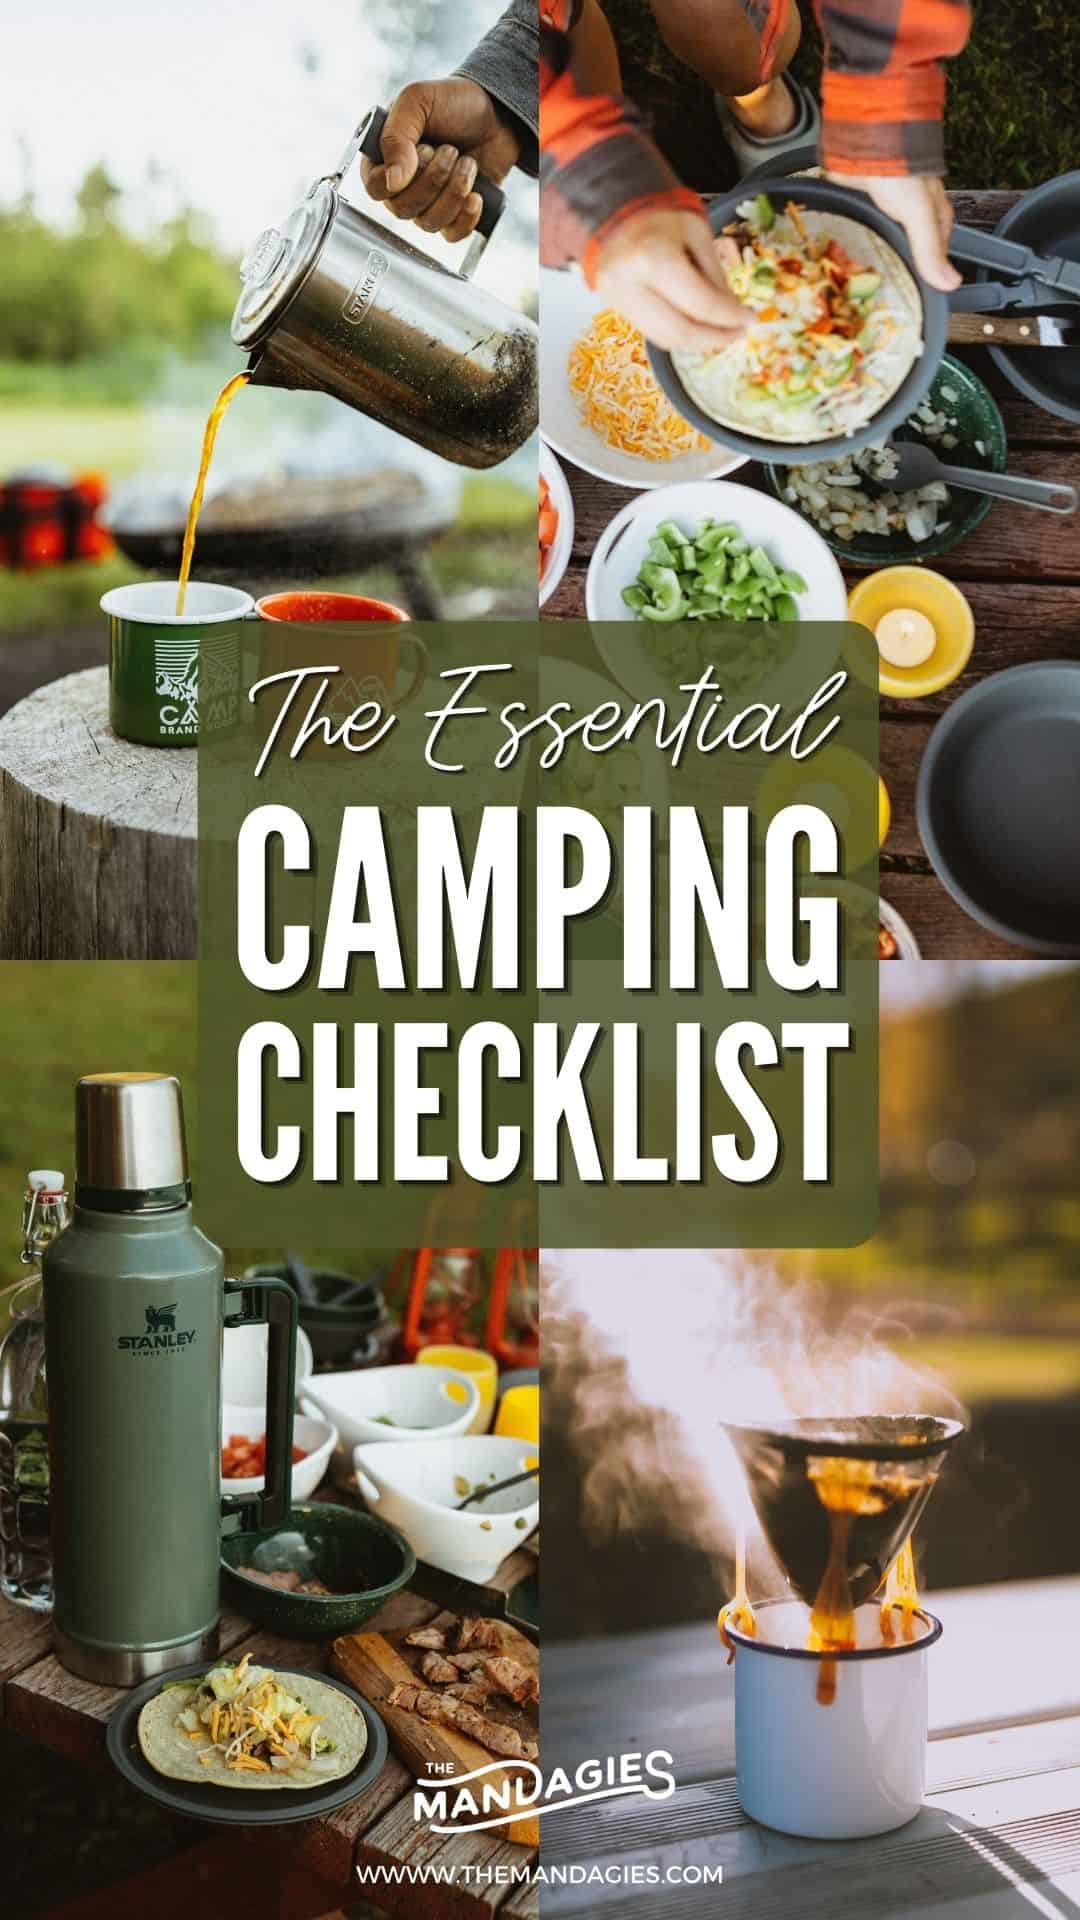 Looking for a no-fuss camping checklist? We're sharing all the camping essentials that we bring and love, proven over countless camping trips and day trips! We're sharing all the essentials for camping, including tents, camping stoves, coolers, camping chairs, and more fun items! Save this post for your next camping trip! #camping #campingessentials #campingpackinglist #packinglist #packing #campground #USA #roadtrip